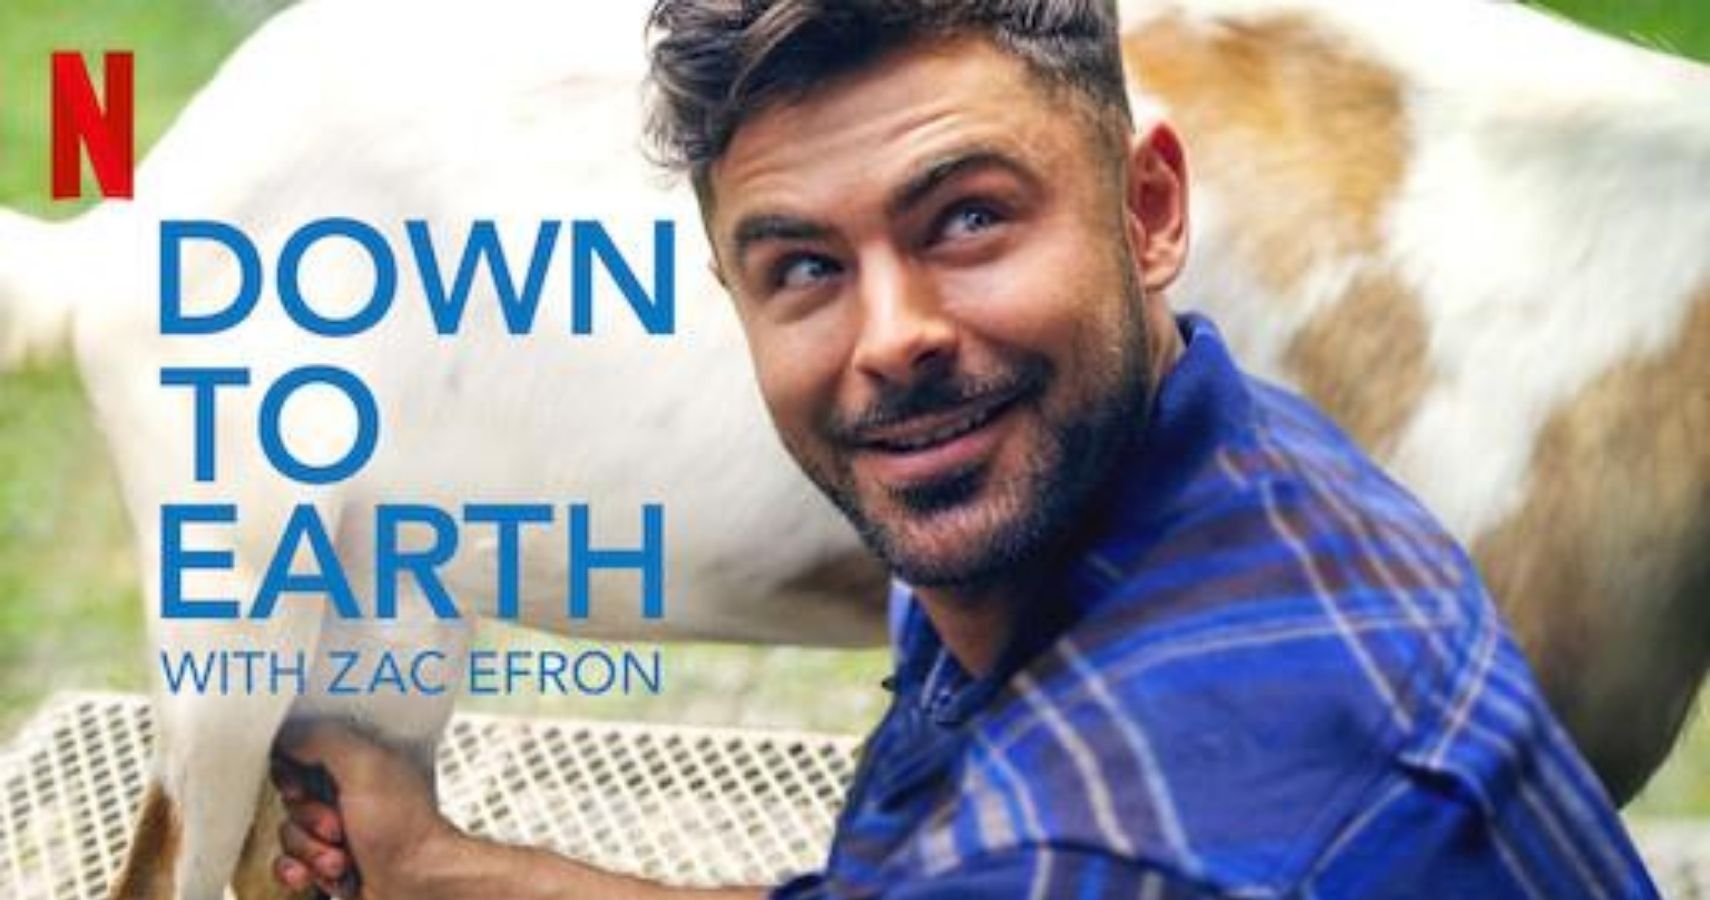 10 Things We Learned From Zac Efron's Down To Earth